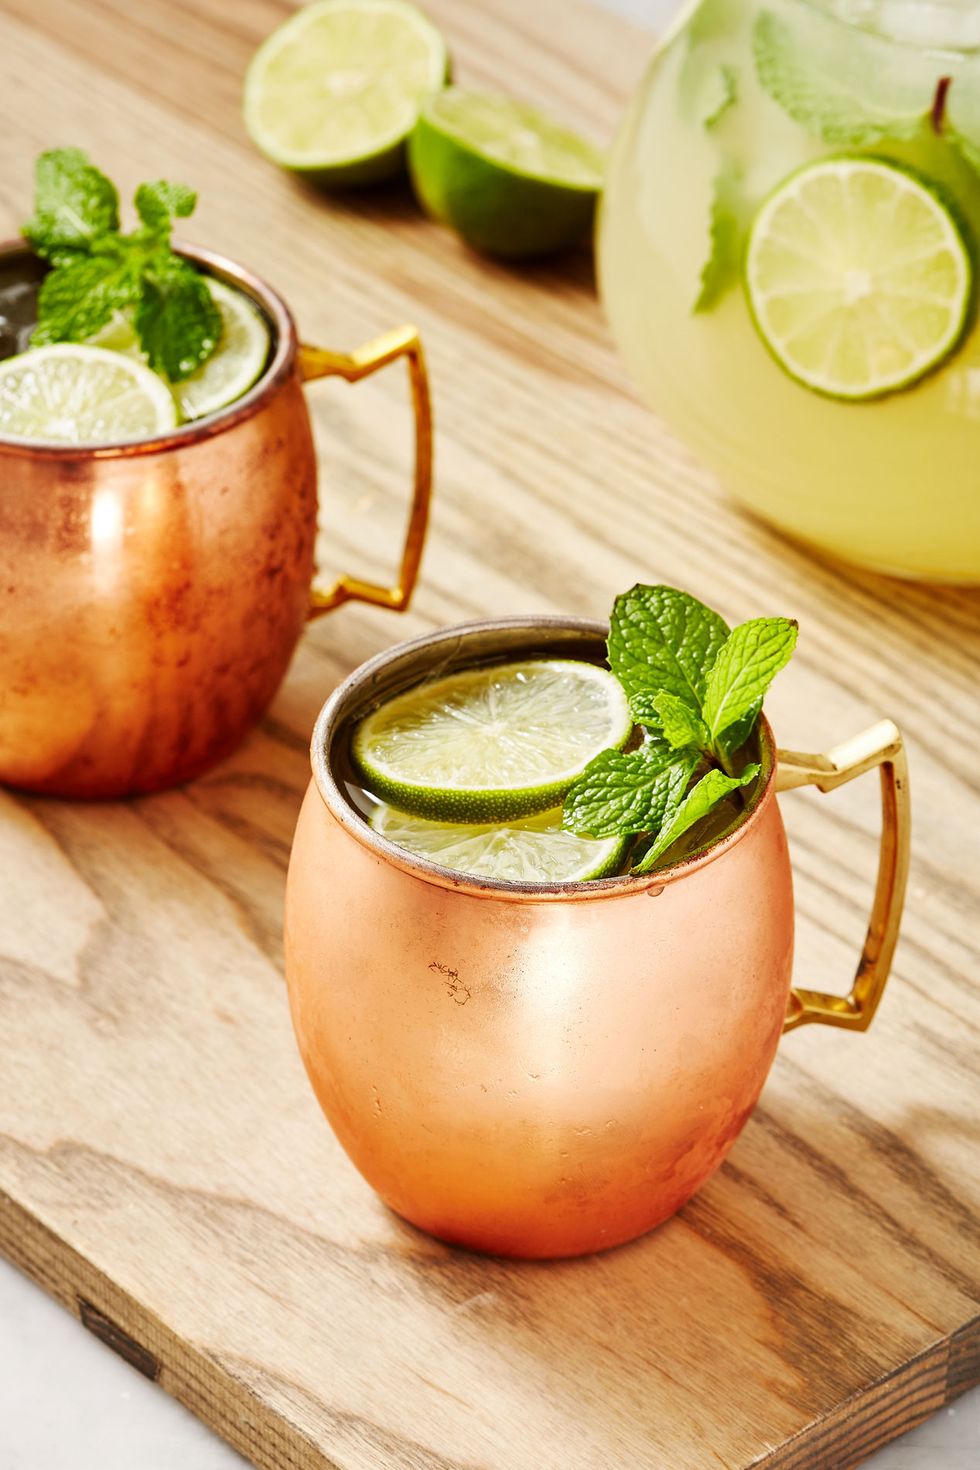 https://hips.hearstapps.com/hmg-prod/images/delish-191018-moscow-mule-punch-0124-portrait-pf-1573163319.jpg?crop=1xw:1xh;center,top&resize=980:*